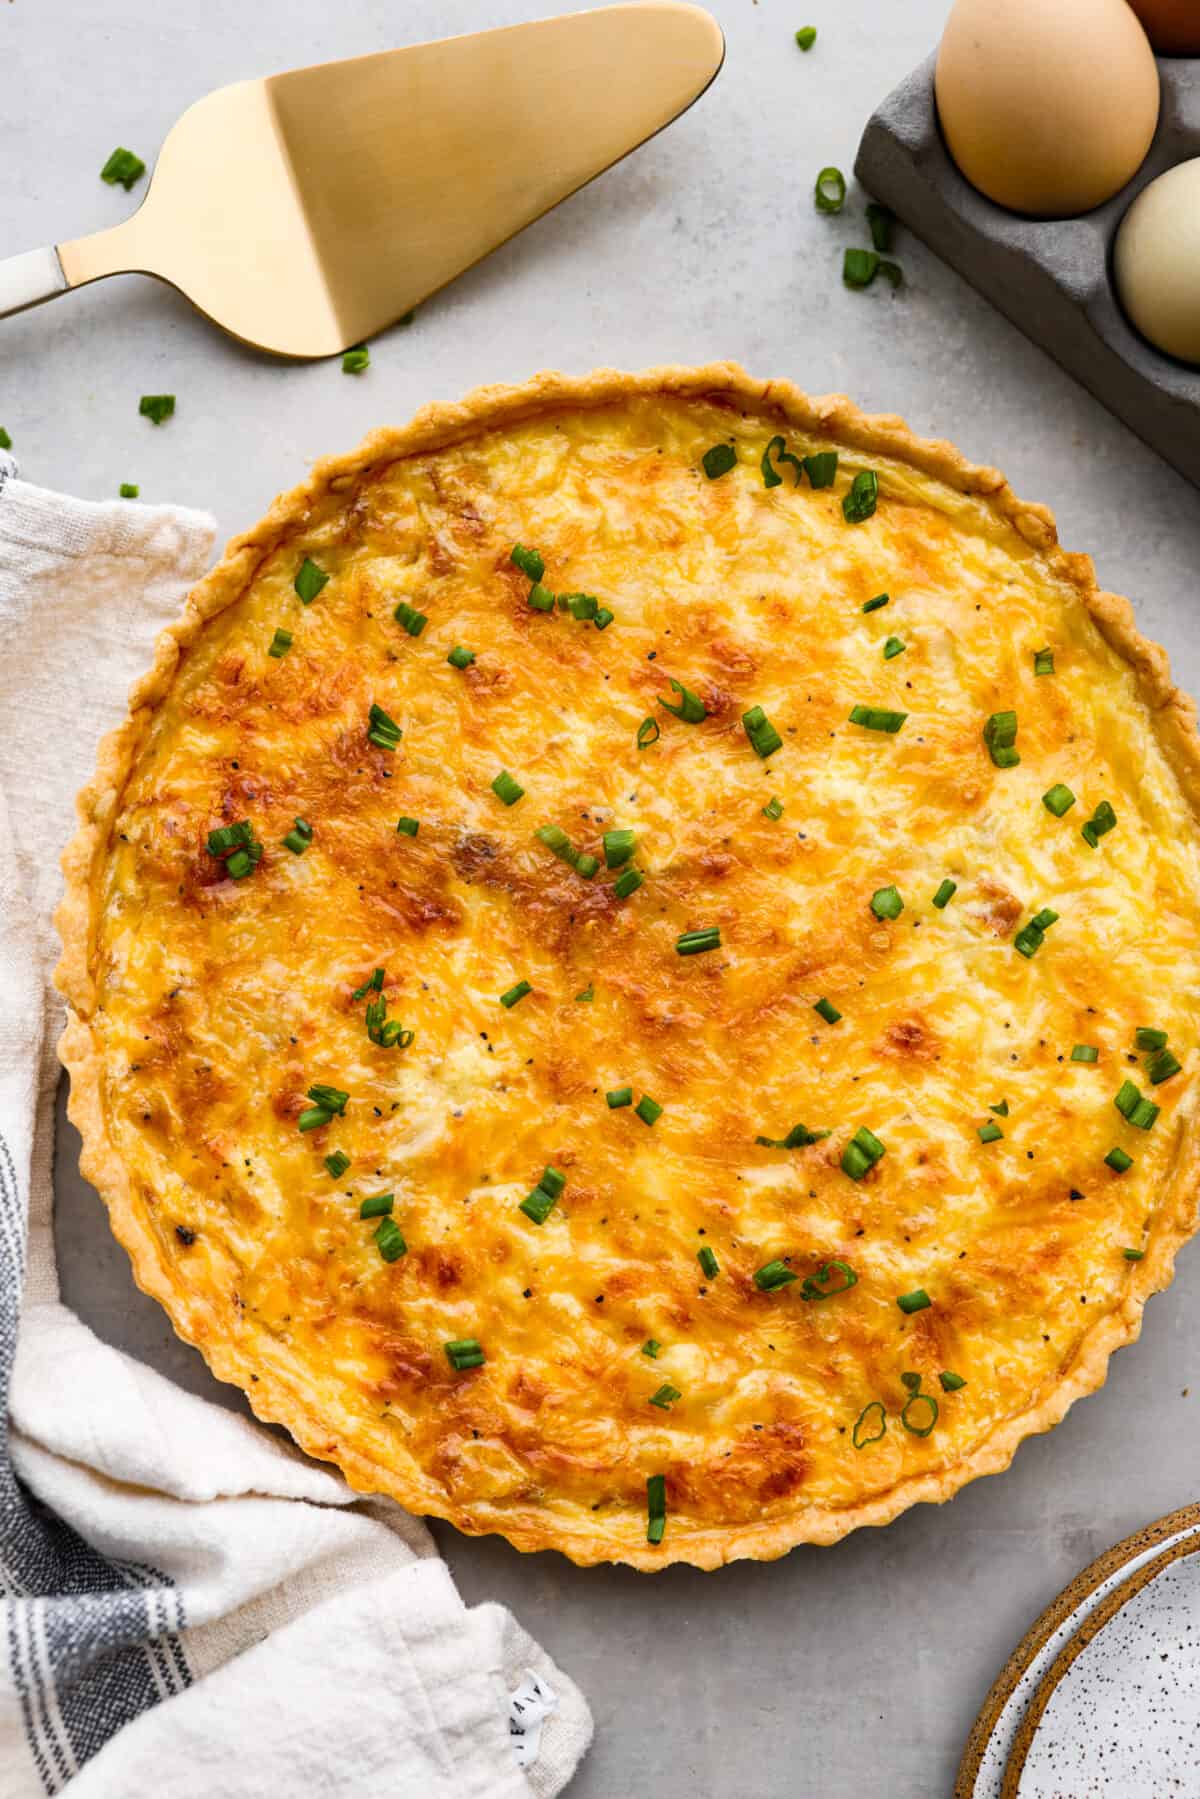 Top-down view of a whole quiche lorraine.